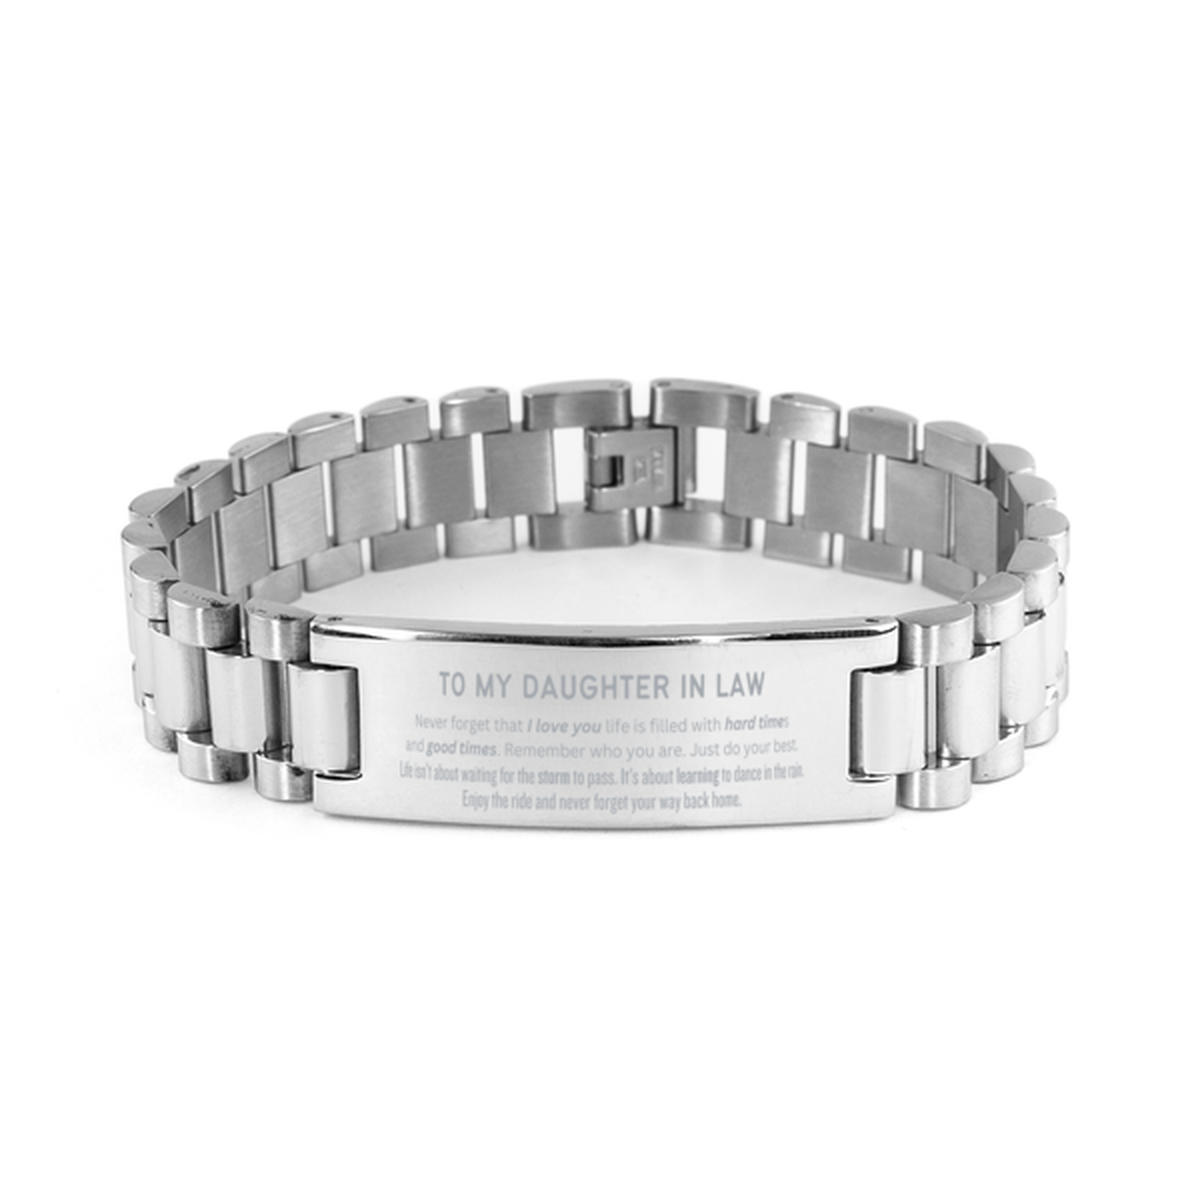 Christmas Daughter In Law Ladder Stainless Steel Bracelet Gifts, To My Daughter In Law Birthday Thank You Gifts For Daughter In Law, Graduation Unique Gifts For Daughter In Law To My Daughter In Law Never forget that I love you life is filled with hard ti